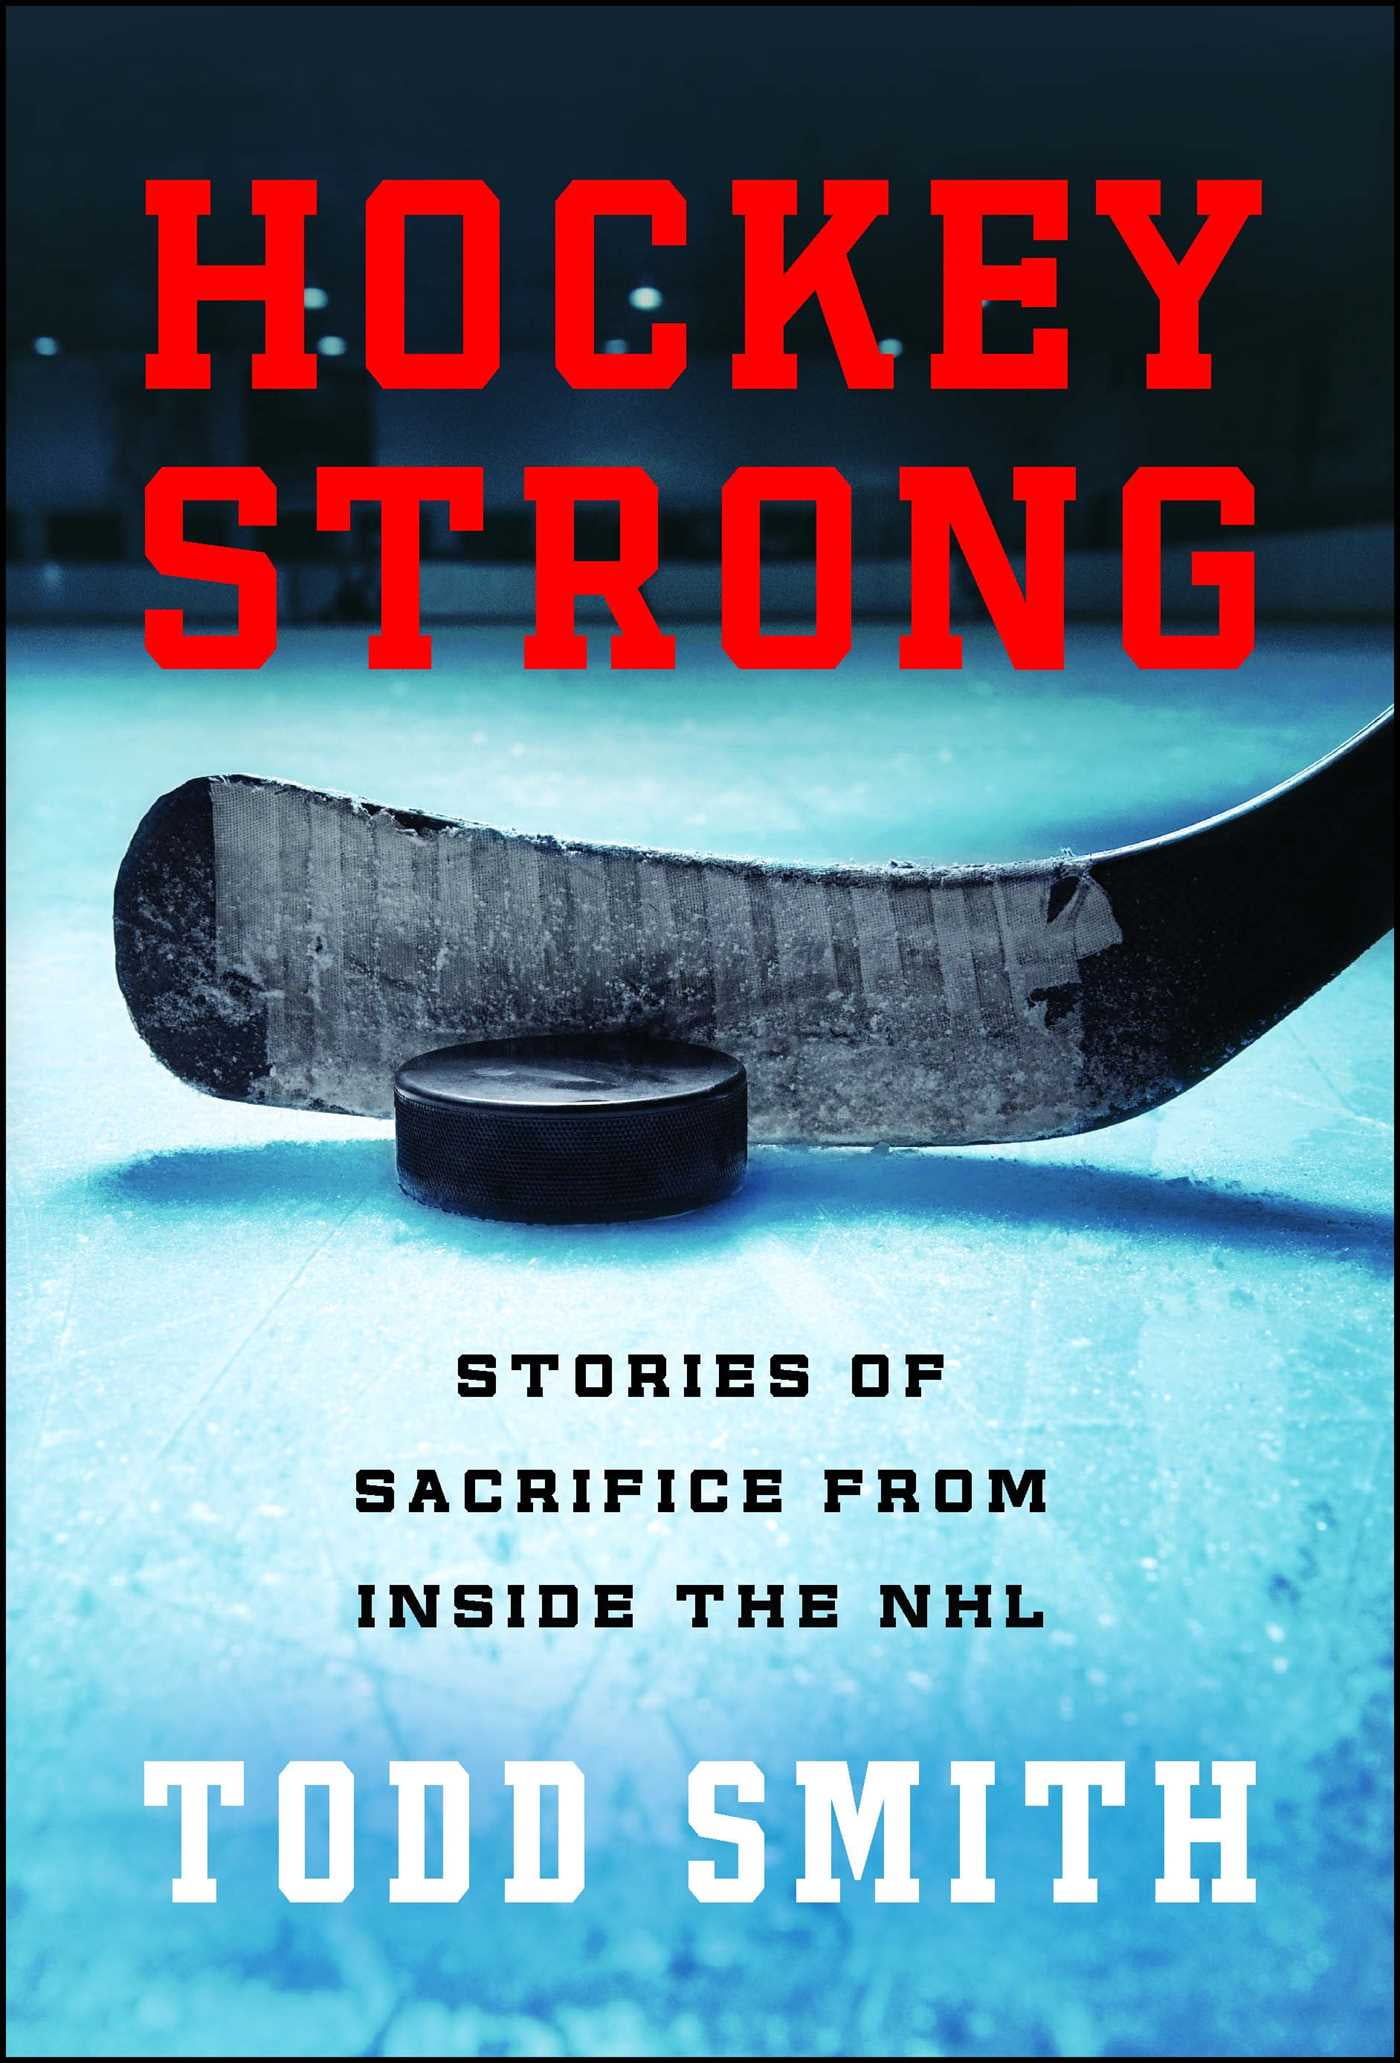 Hockey Strong Stories of Sacrifice from Inside the NHL